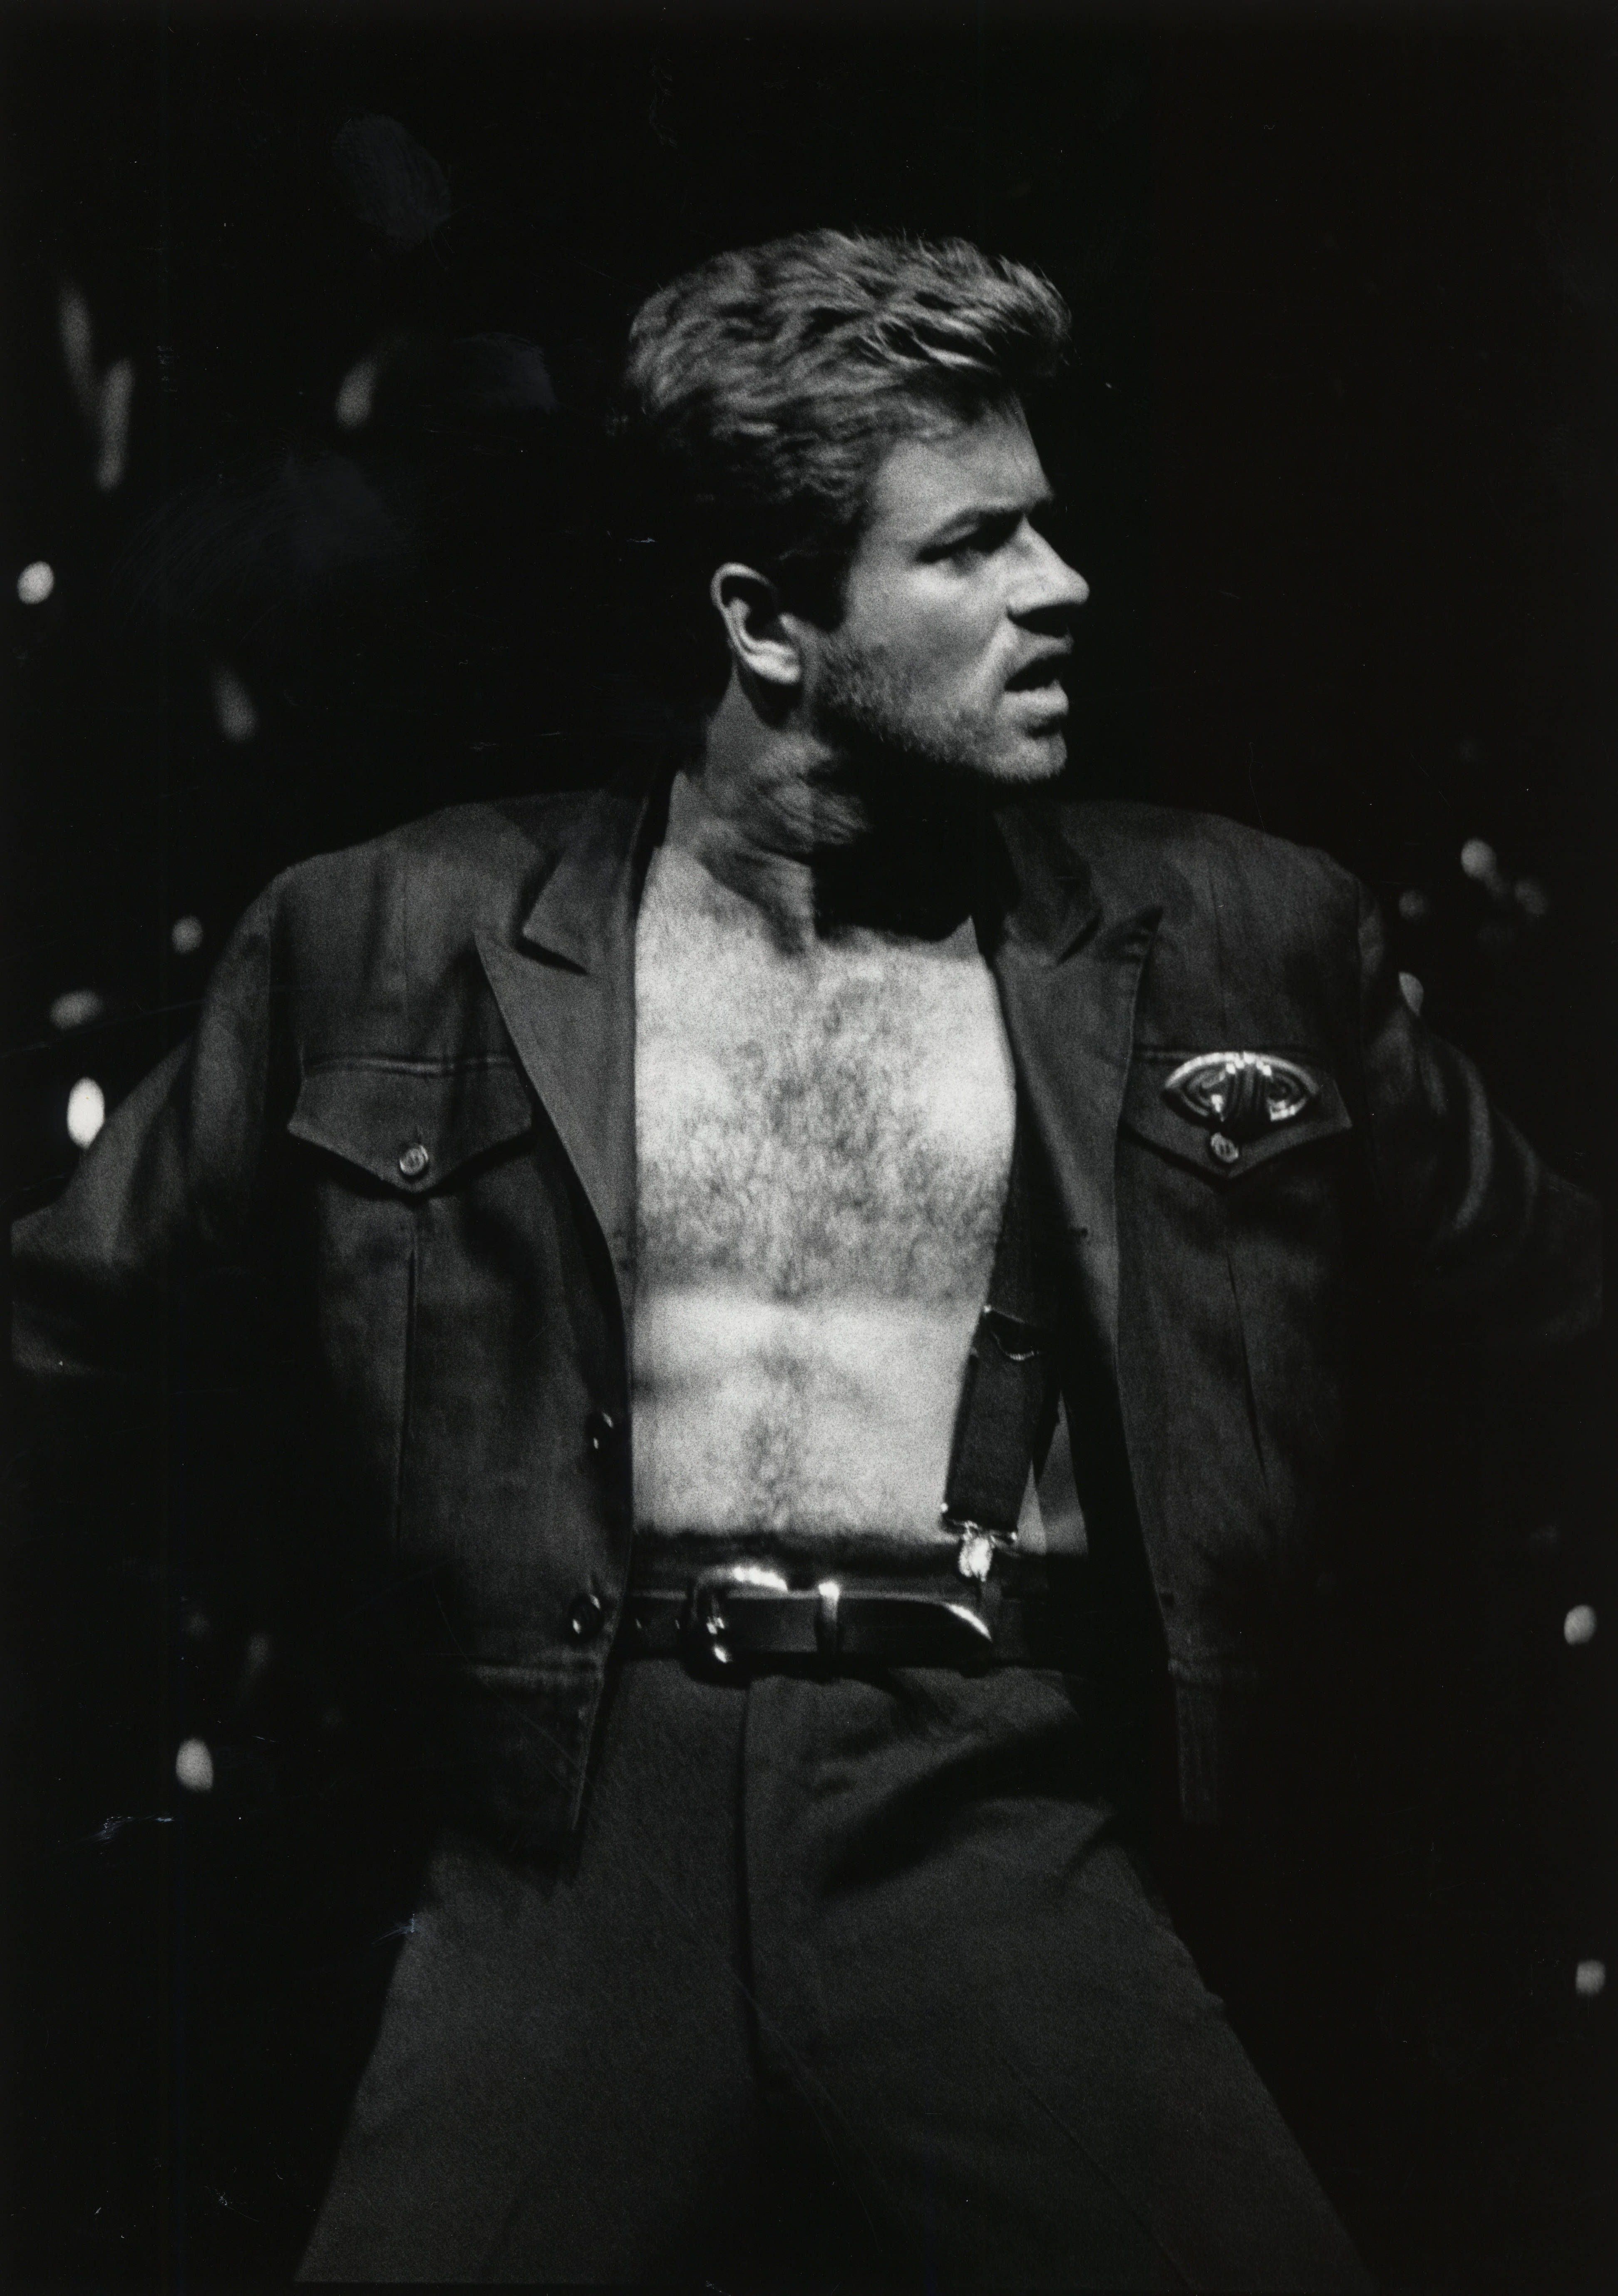 English: George Michael performing on stage during the Faith World Tour in 1988.